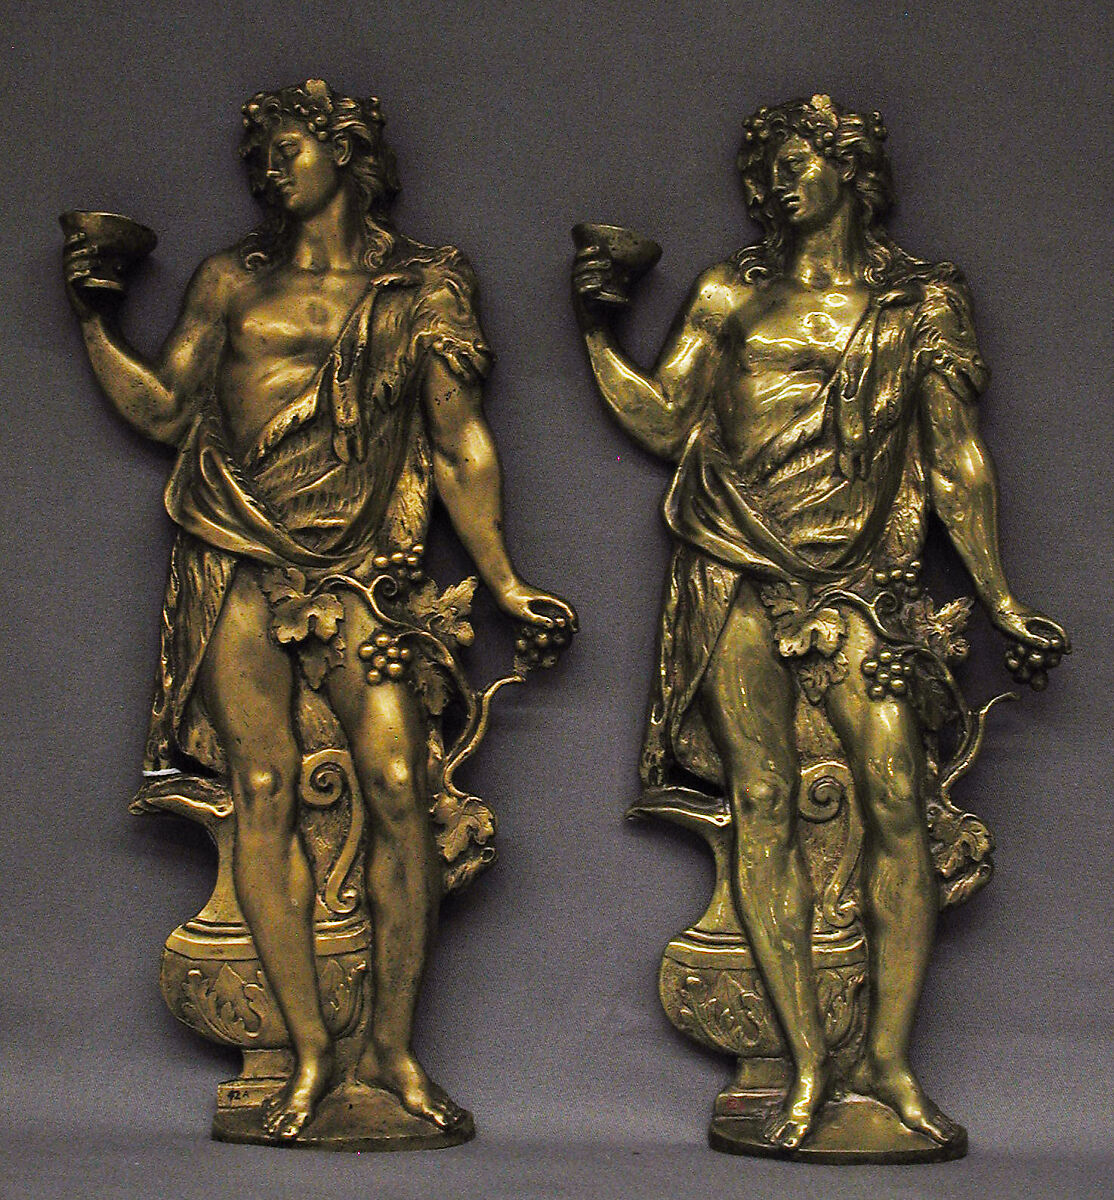 Panel ornaments (part of a set), Gilt bronze, French 